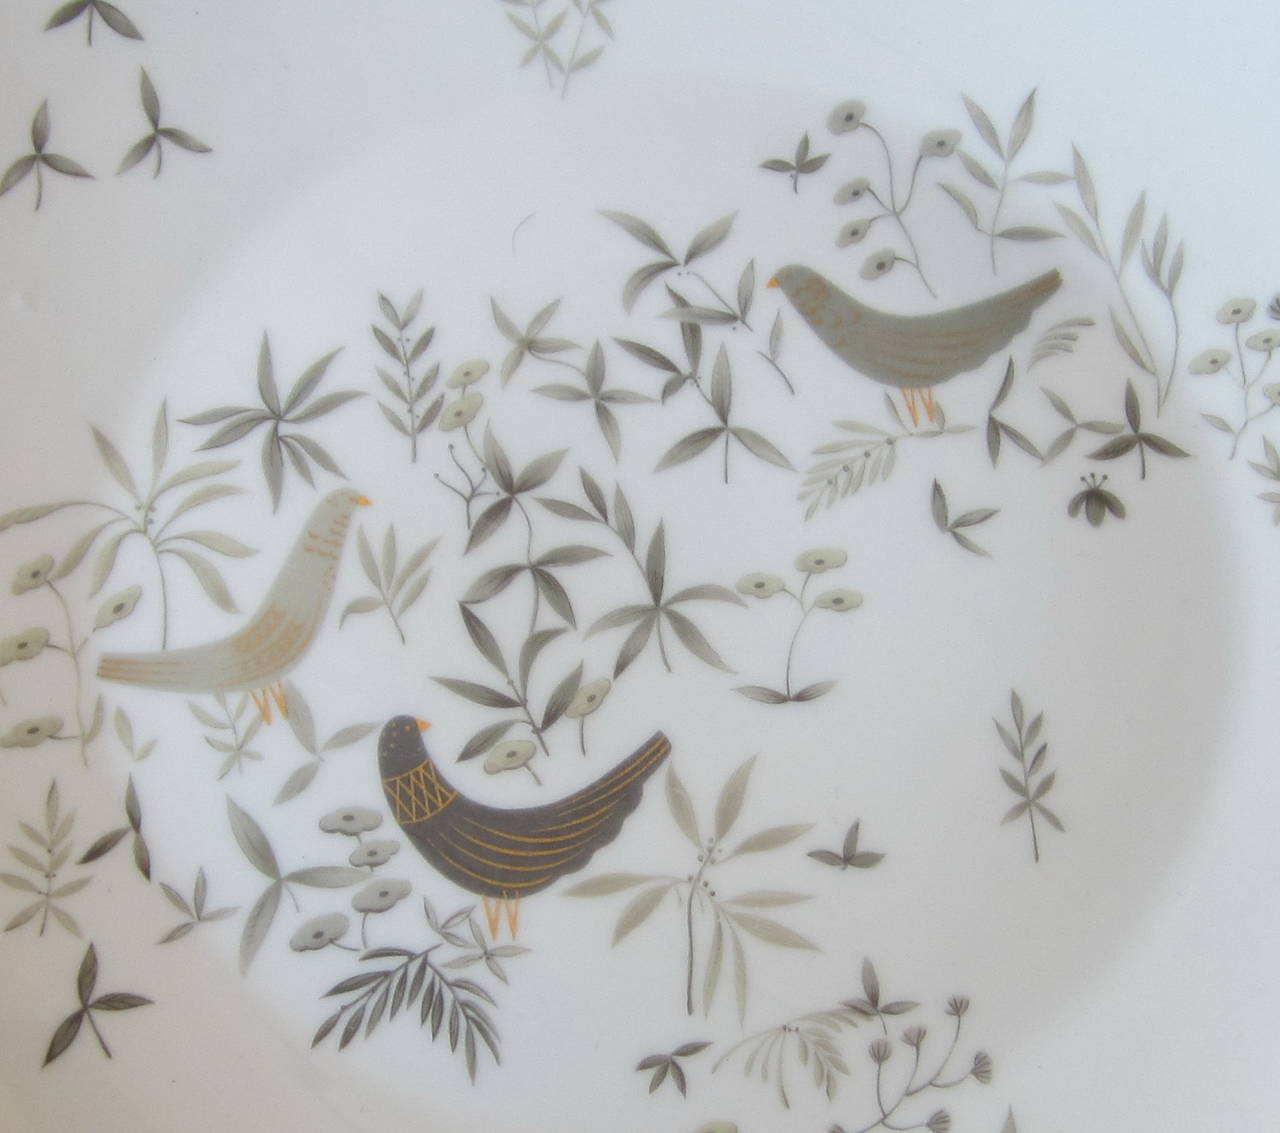 Rosenthal.

Raymond Loewy.

Set of vintage Mid-Century Rosenthal birds on trees china designed by Raymond Loewy.

Plate service for eight. Charming and rare discontinued pattern in gold/taupe tones featuring three birds.